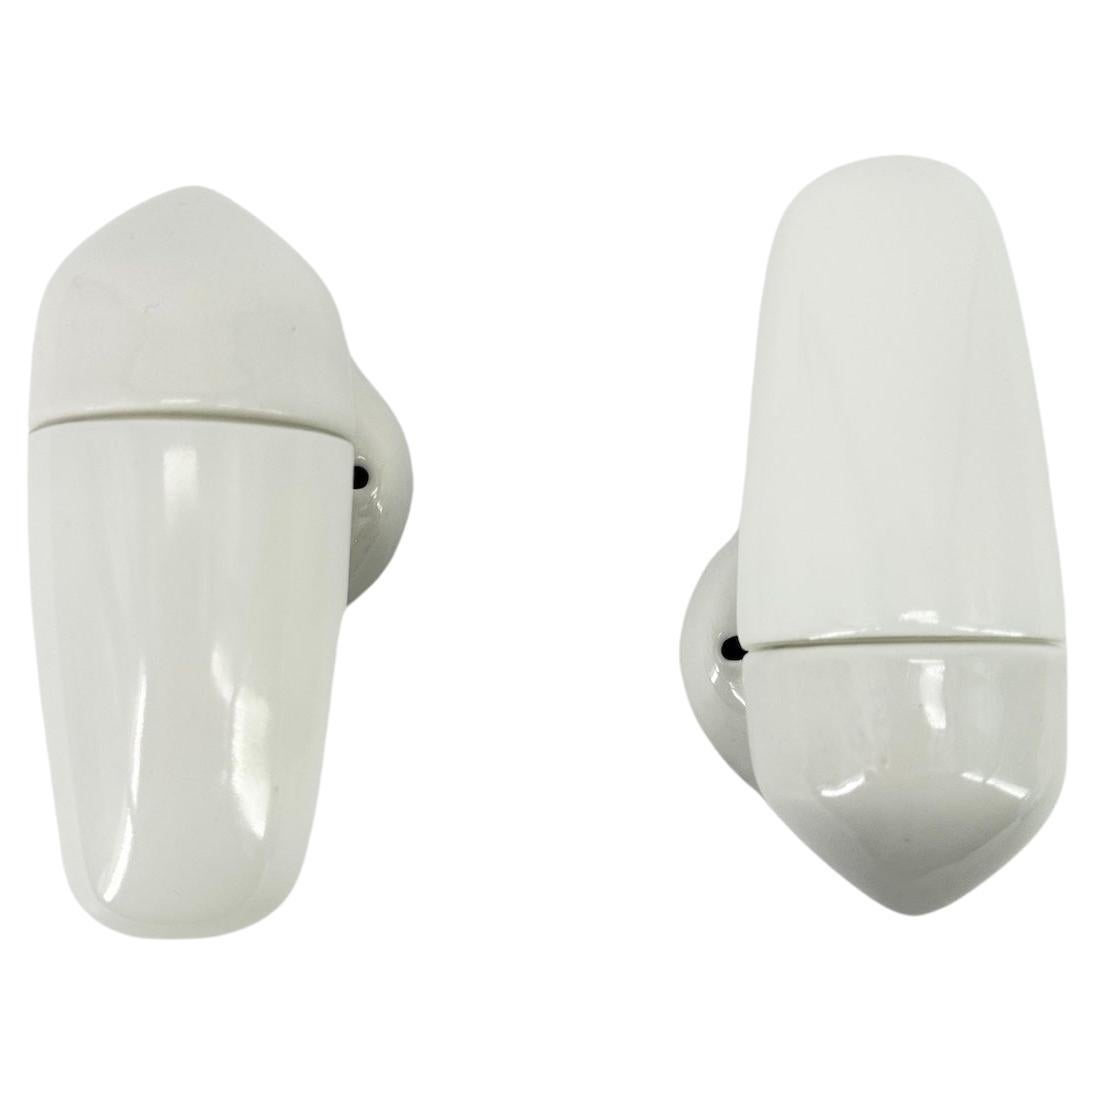 Wall light in white porcelain and opaline glass shades were designed by the German designer Wilhelm Wagenfeld, who studied at the Bauhaus school. 

This model dates from 1958 with sleek, round and elegant lines, a timeless design that will look